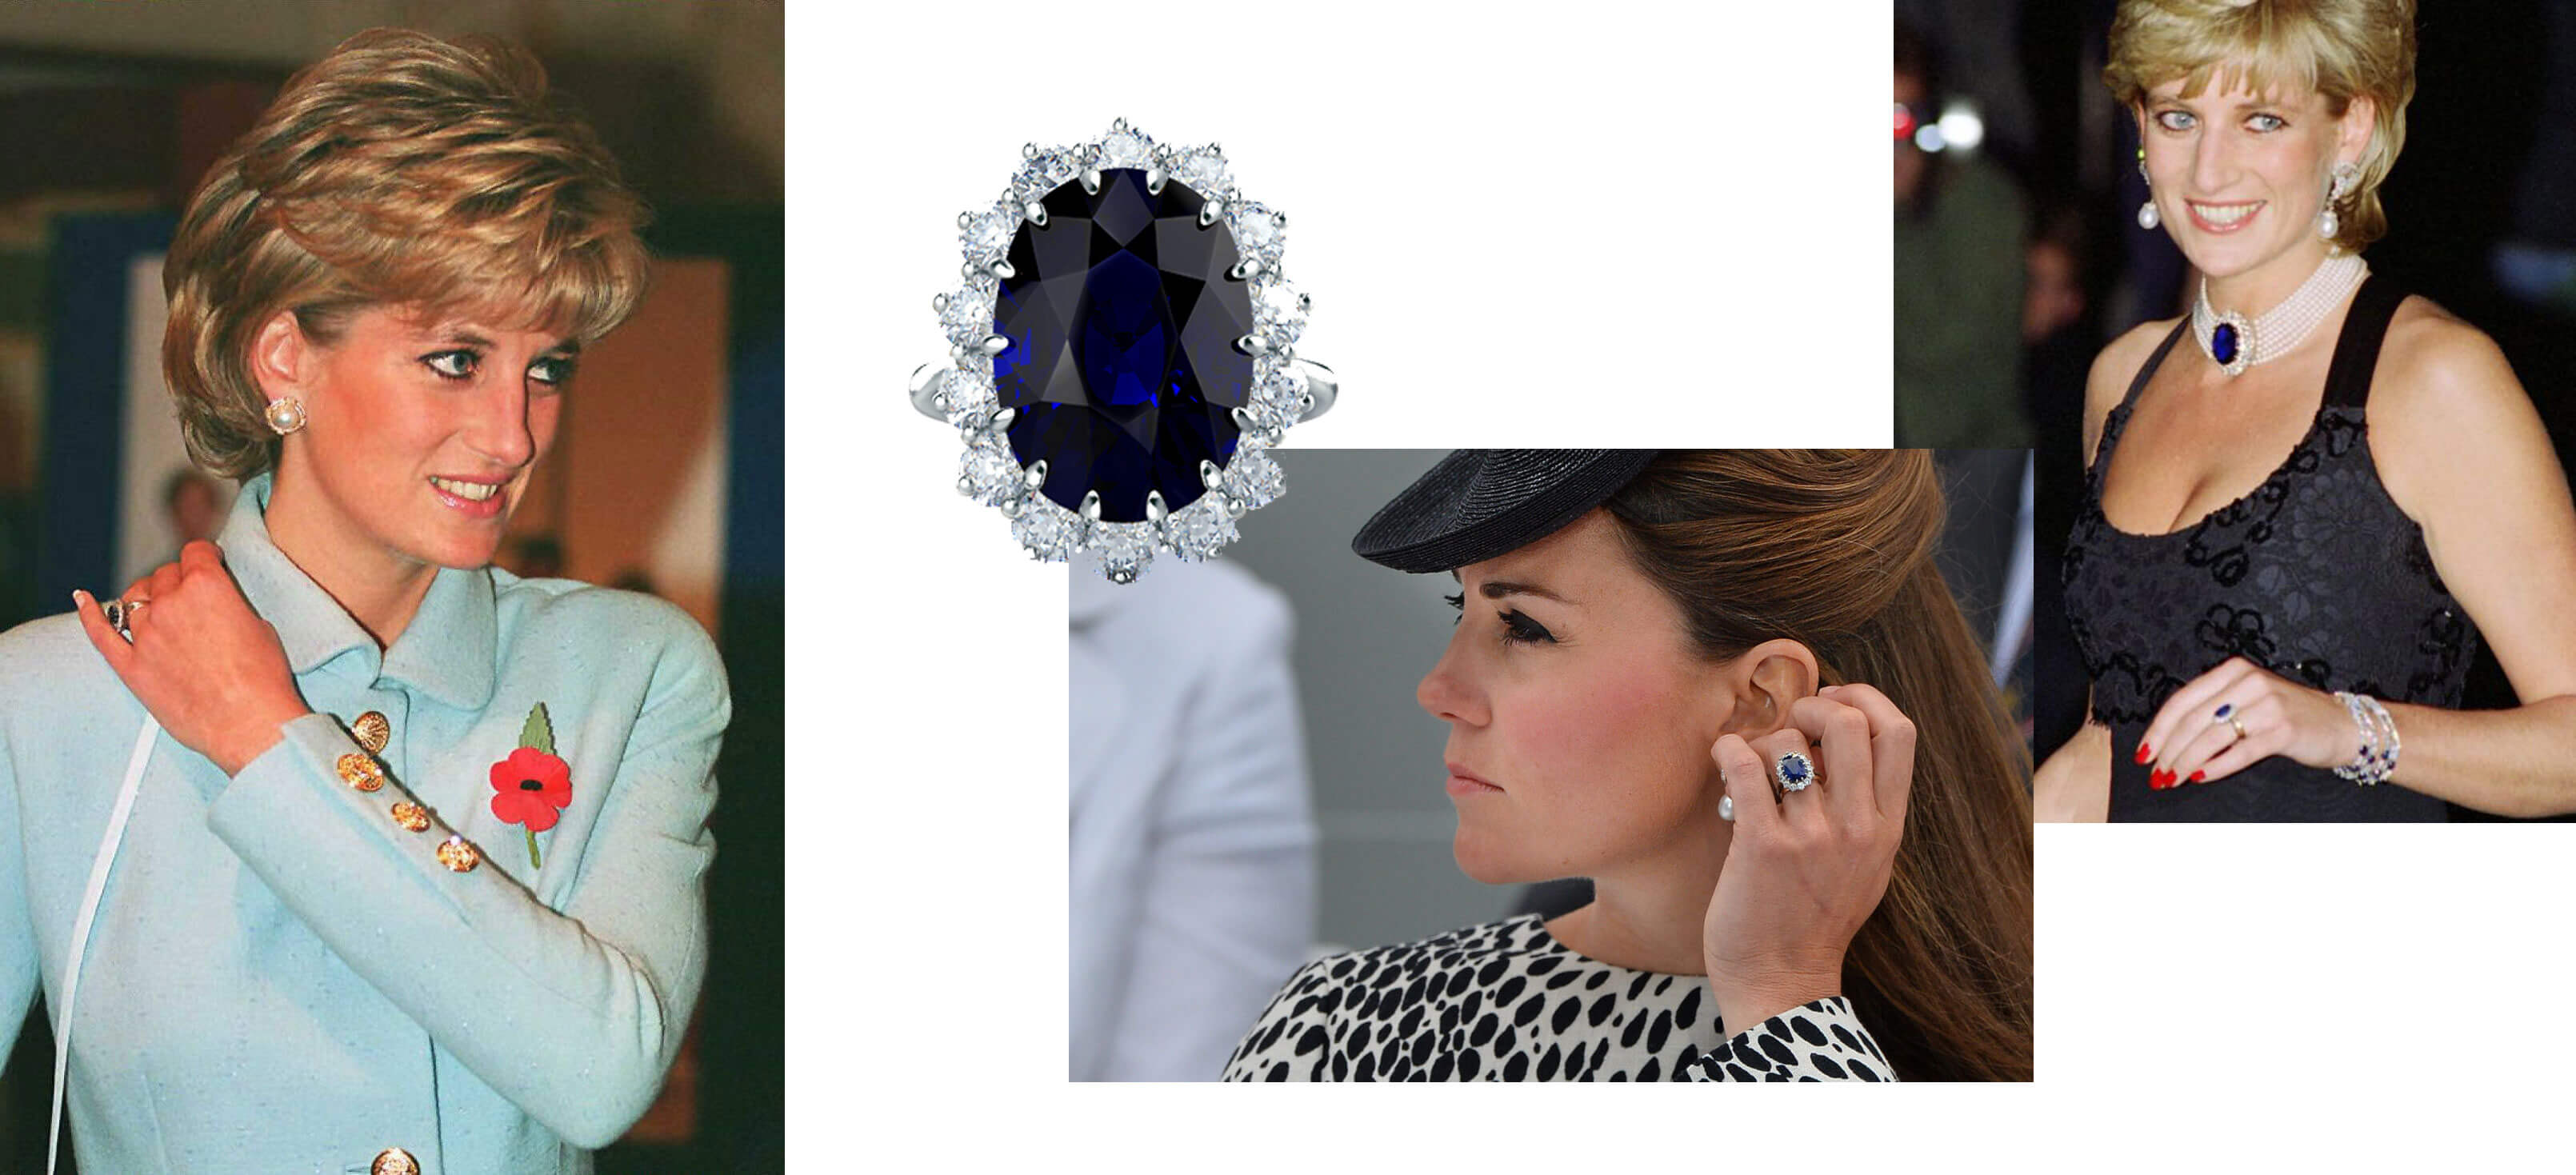 Princess Diana and the Duchess of Cambridge wearing the huge Sapphire engagement ring